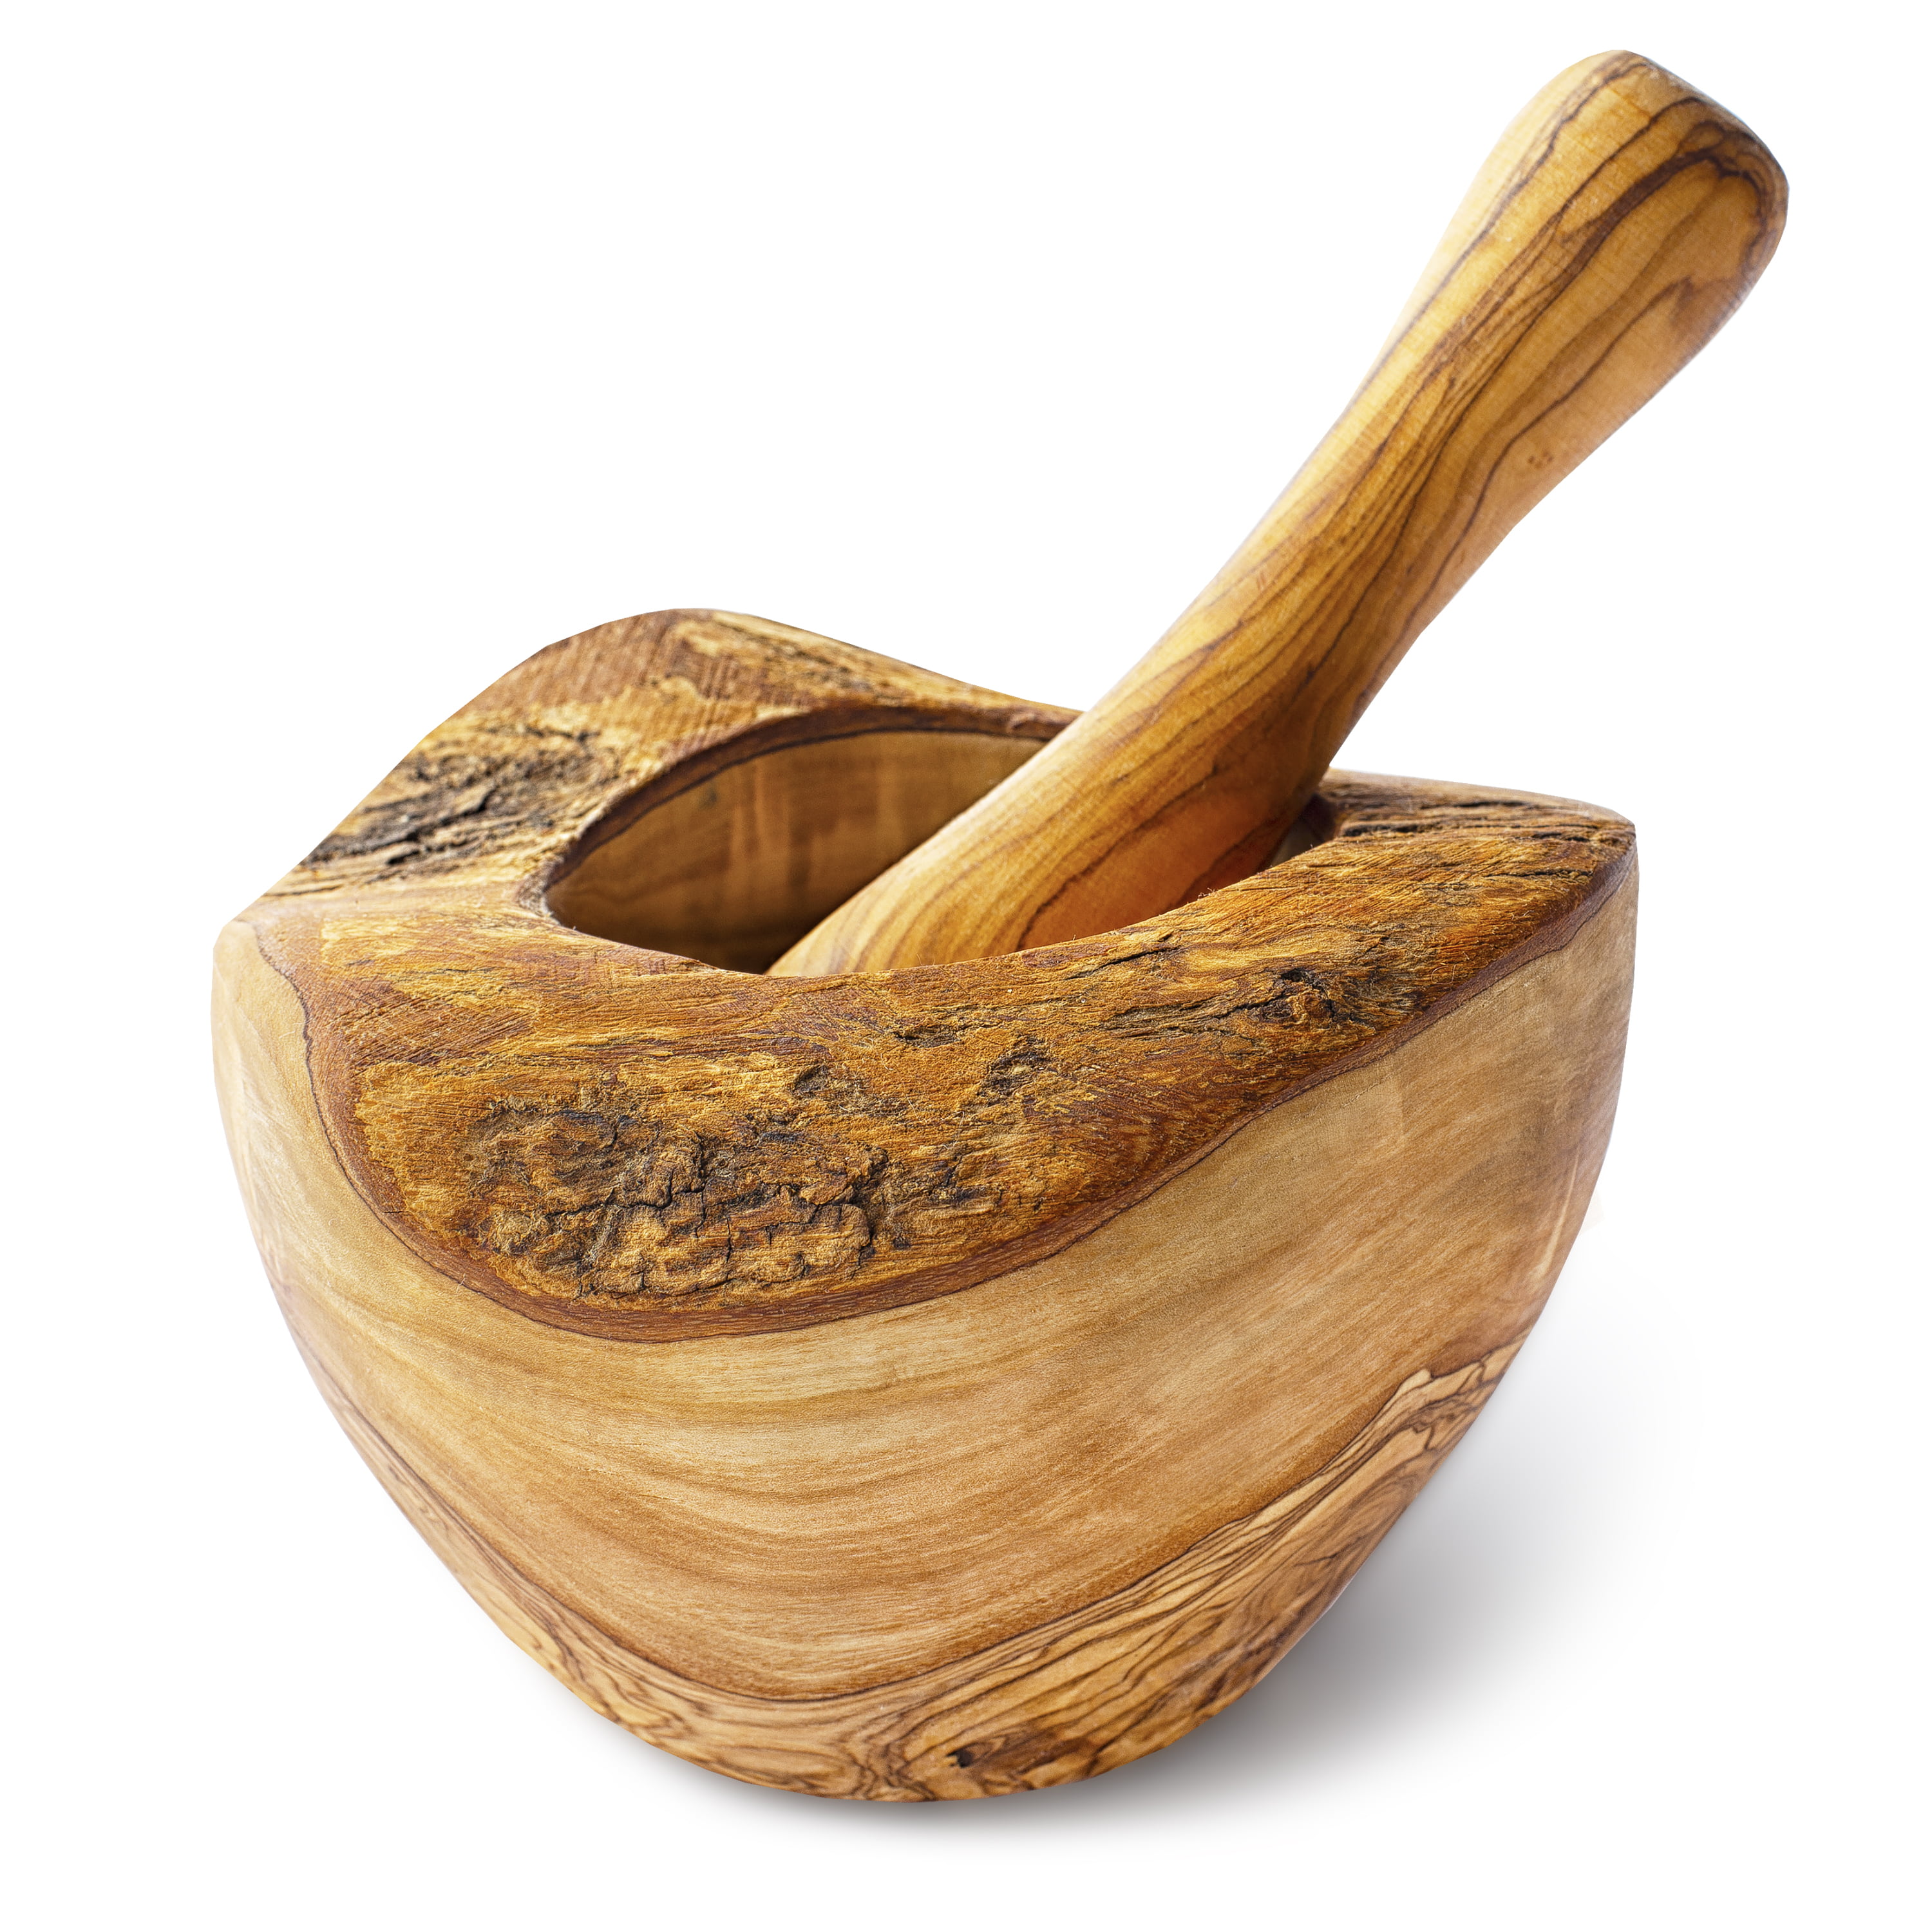 Handmade Small Wooden Mortar and Pestle Set Grinding and Mixing Bowl KitchenTool 